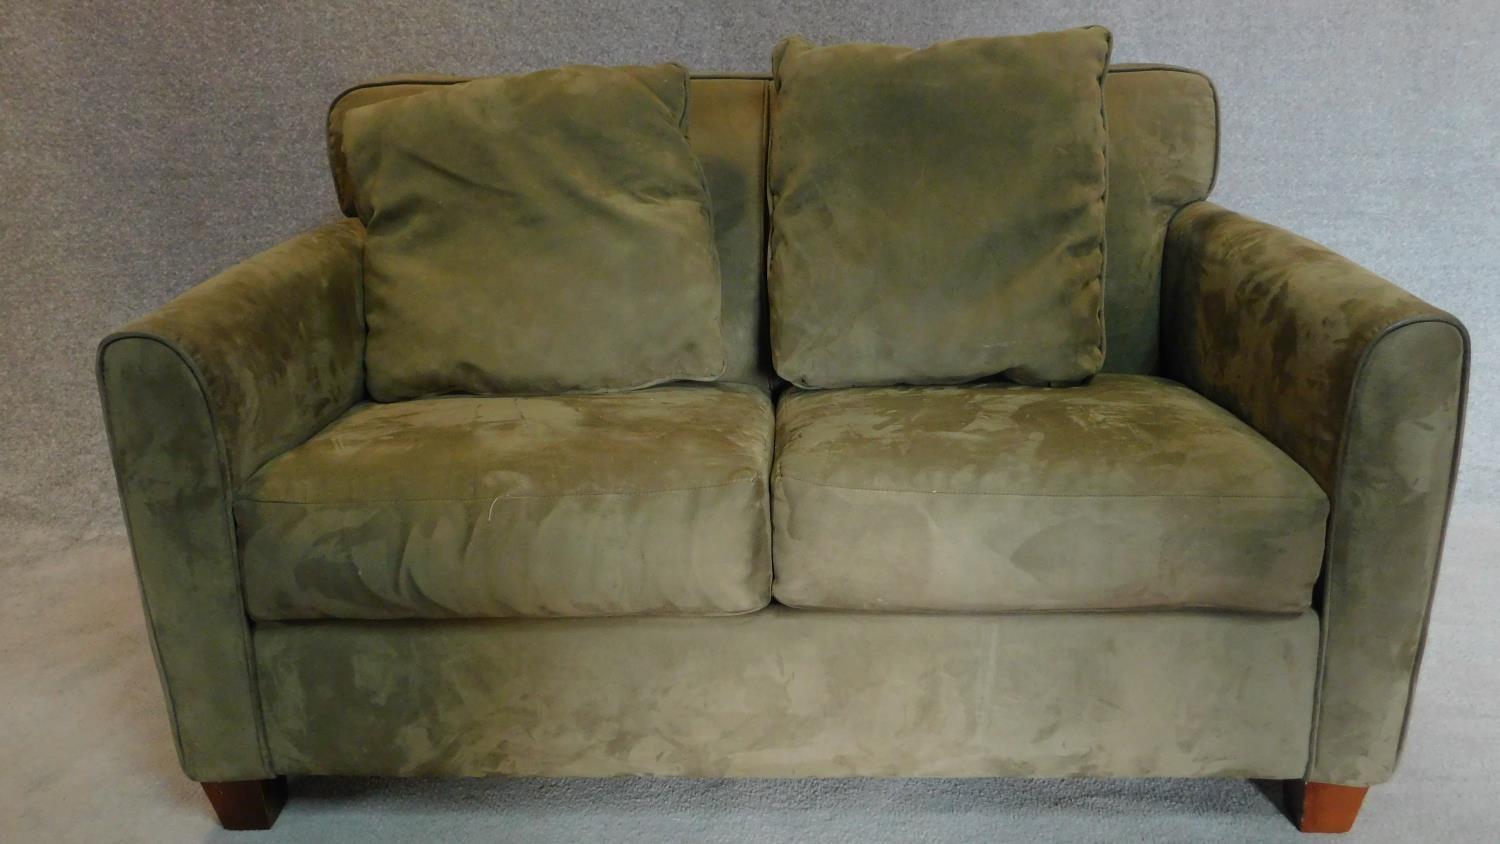 A 2 seater sofa in sage faux suede upholstery. 88x145x93cm - Image 2 of 3